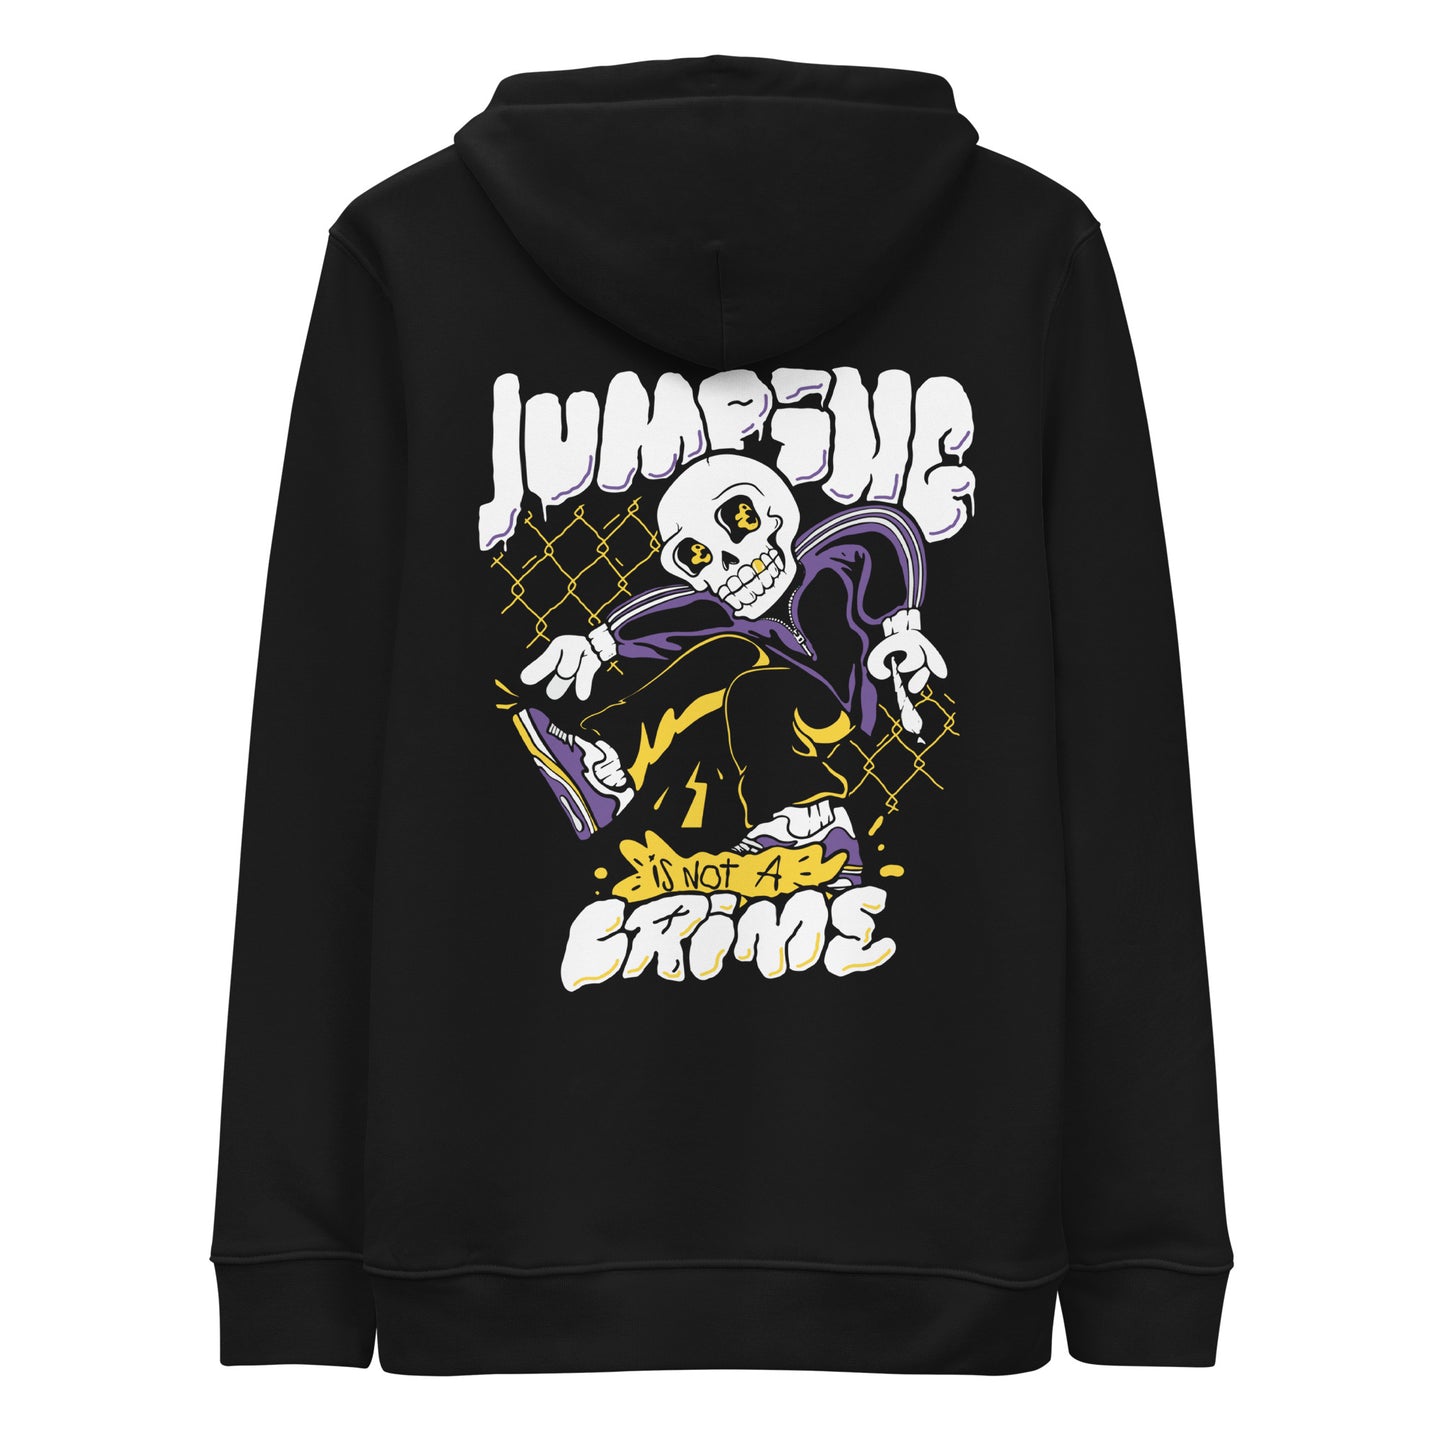 Jumping is not a crime | Unisex hoodie